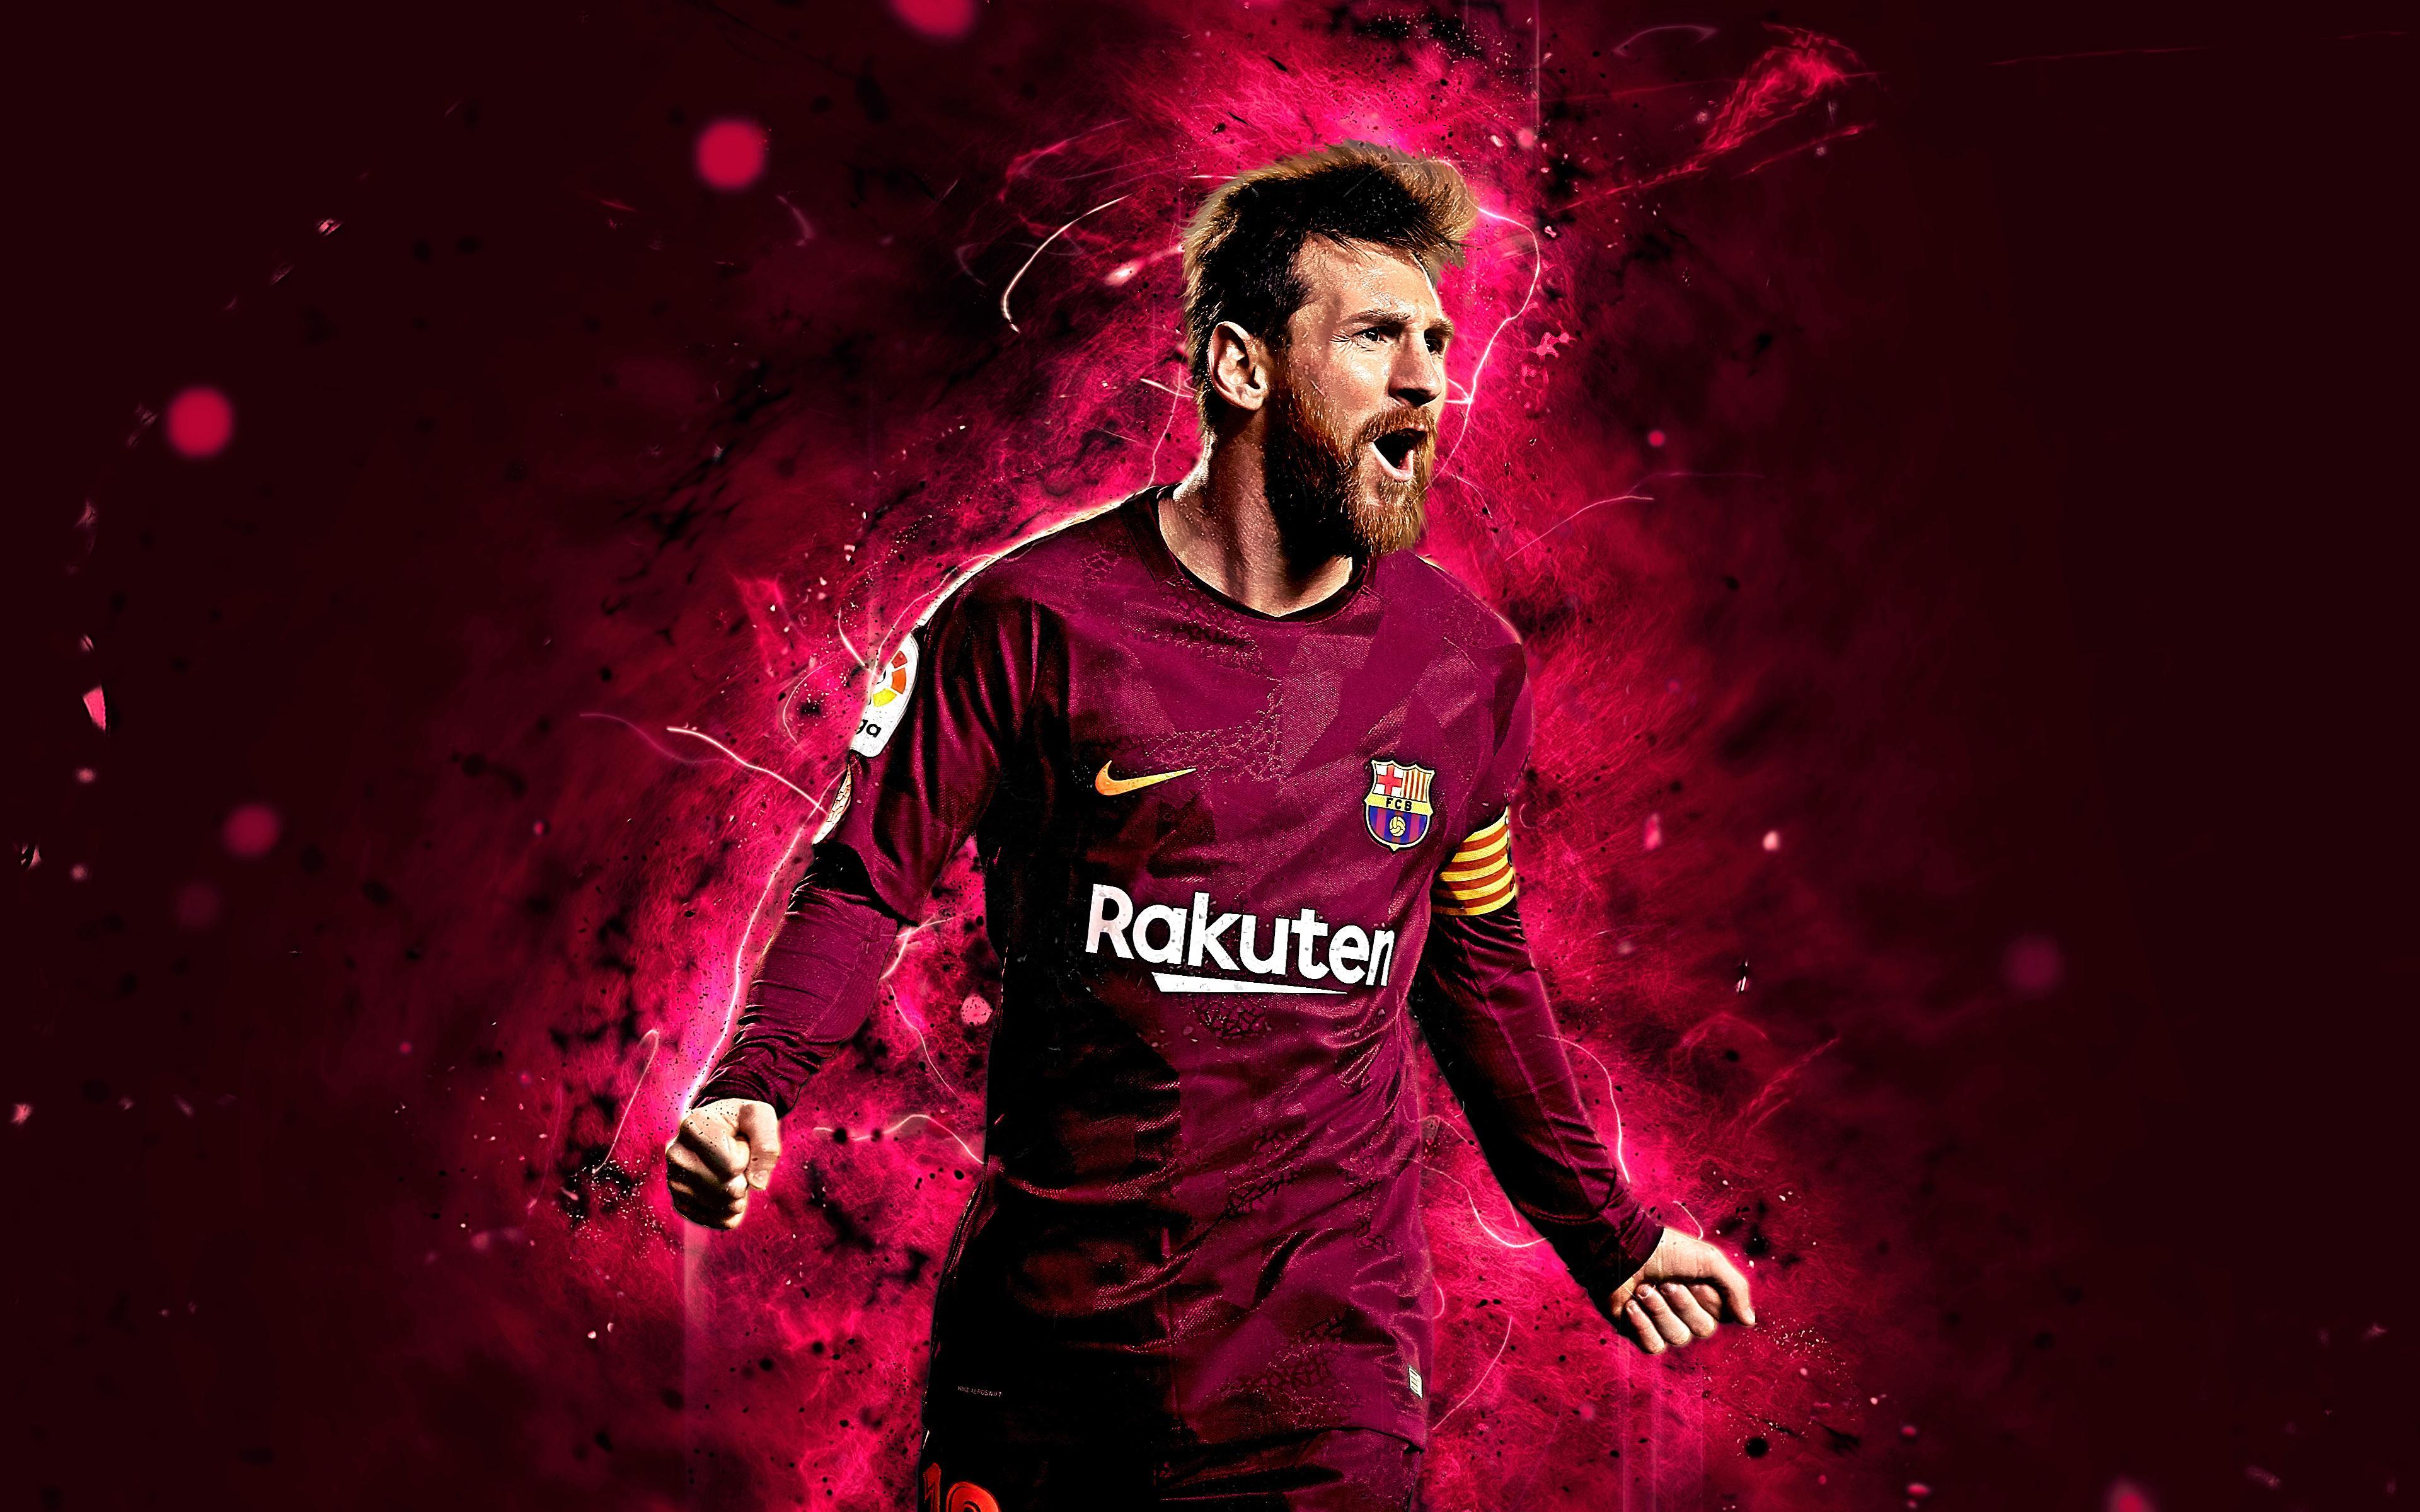 Lionel Messi Wallpaper Download High Quality HD Image of Messi